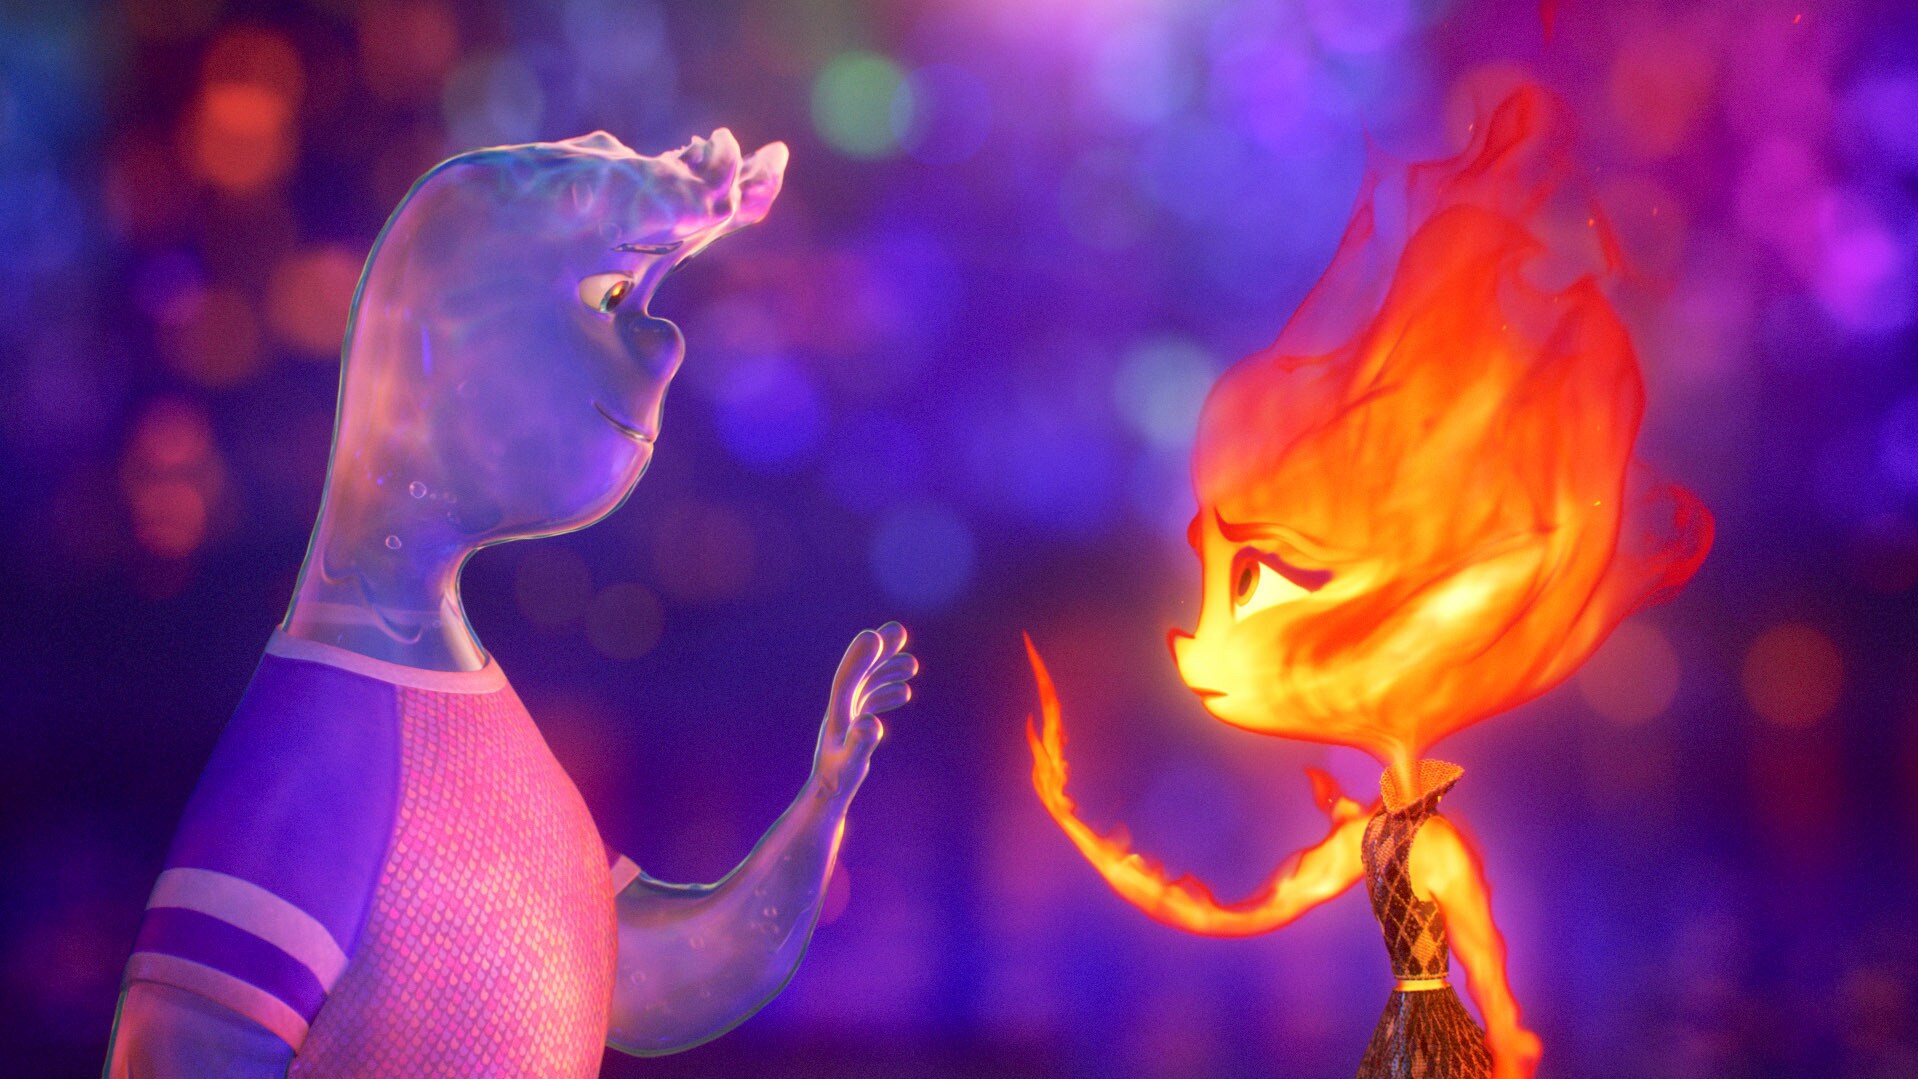 DISNEY AND PIXAR’S “ELEMENTAL” BEGINS STREAMING ON DISNEY+ SEPT. 13  – TV SPOT AND KEY ART NOW AVAILABLE